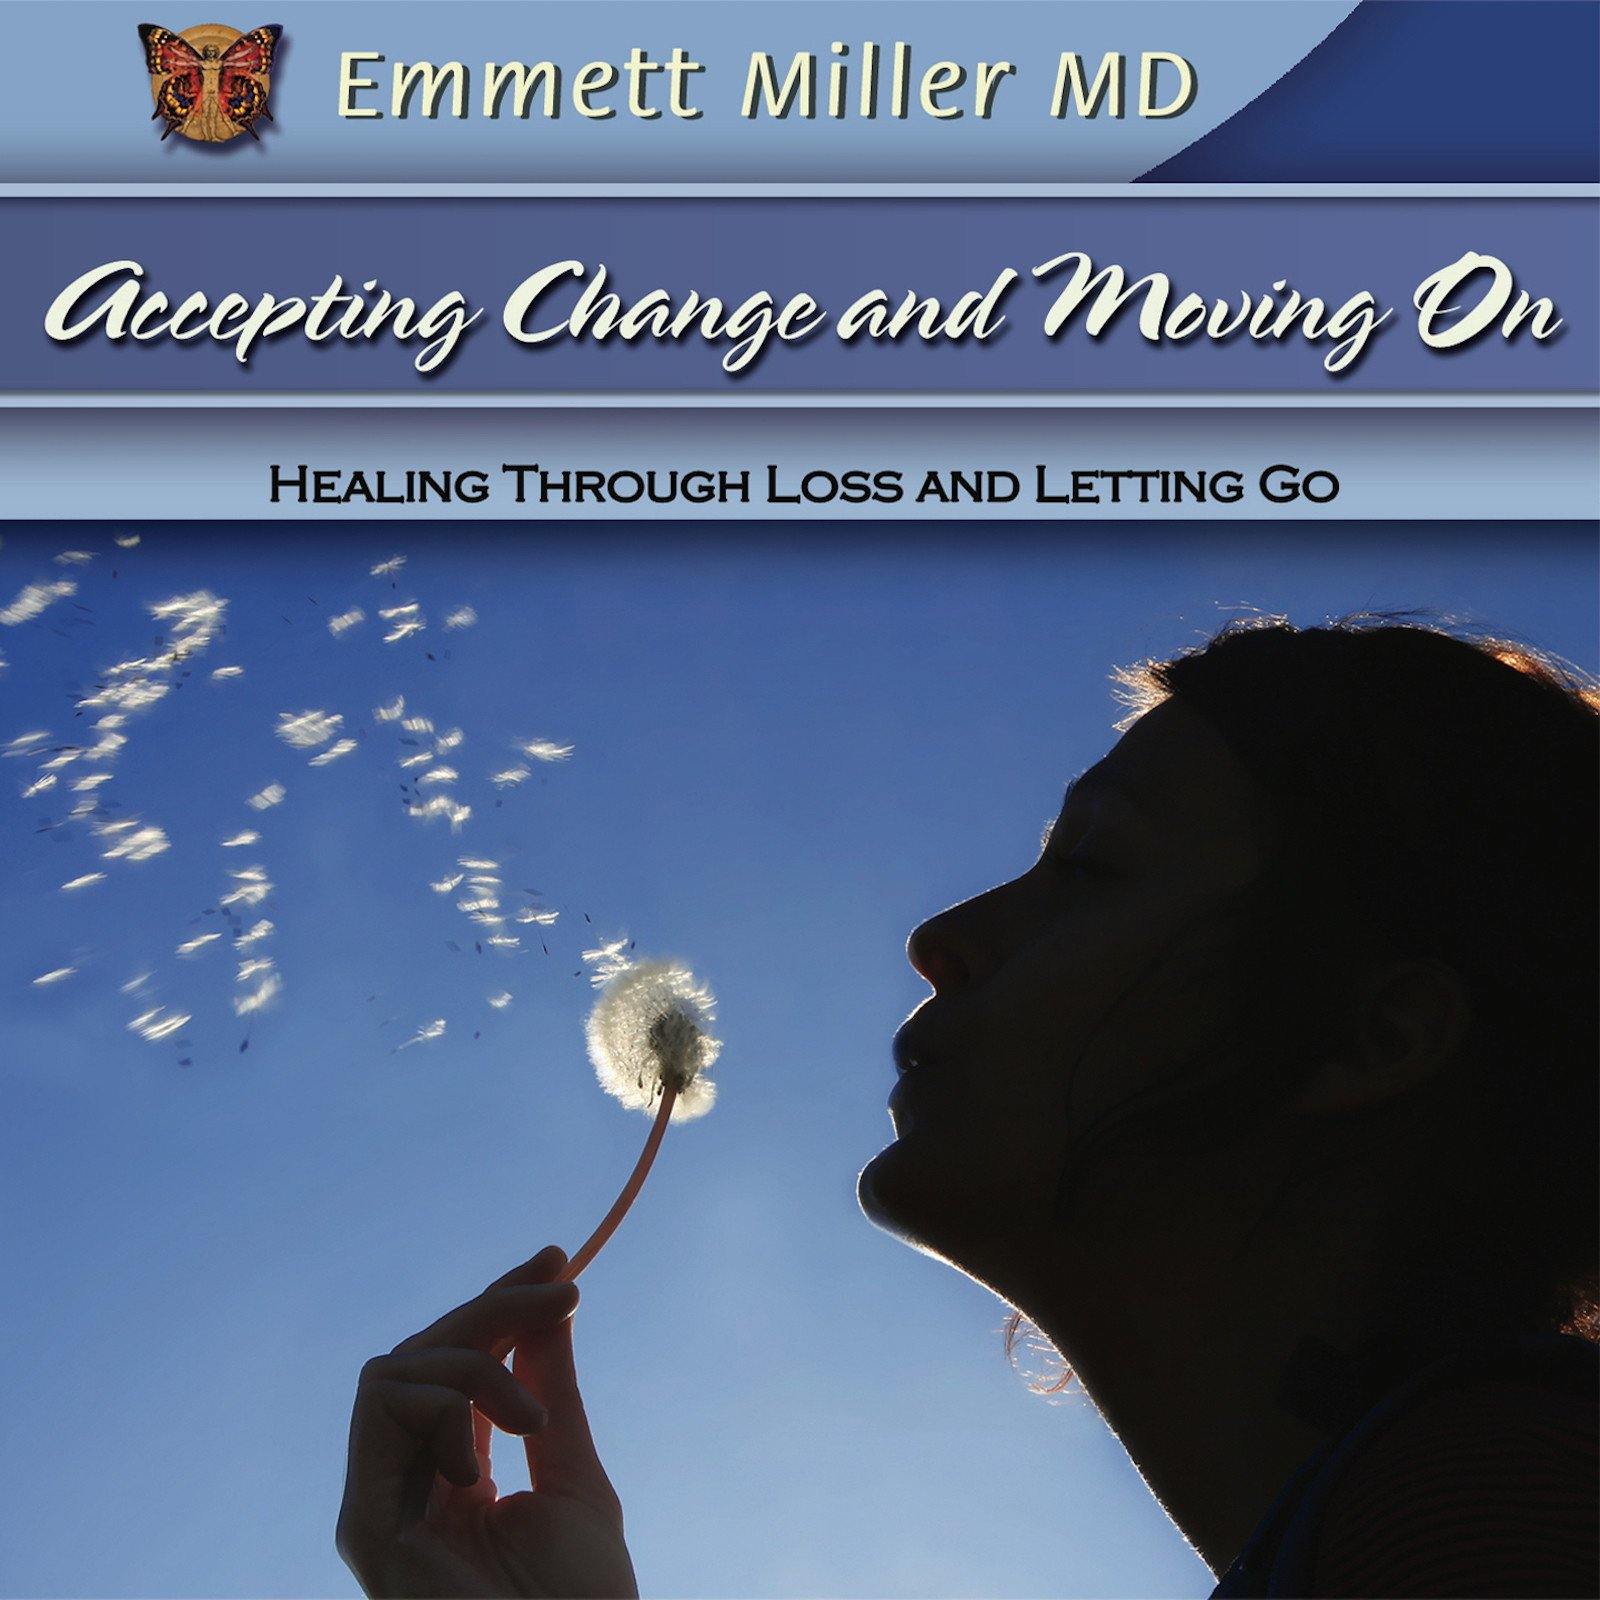 Accepting Change and Moving On: Healing through Loss and Letting Go with Dr. Emmett Miller Audio Program Dr. Emmett Miller - BetterListen!